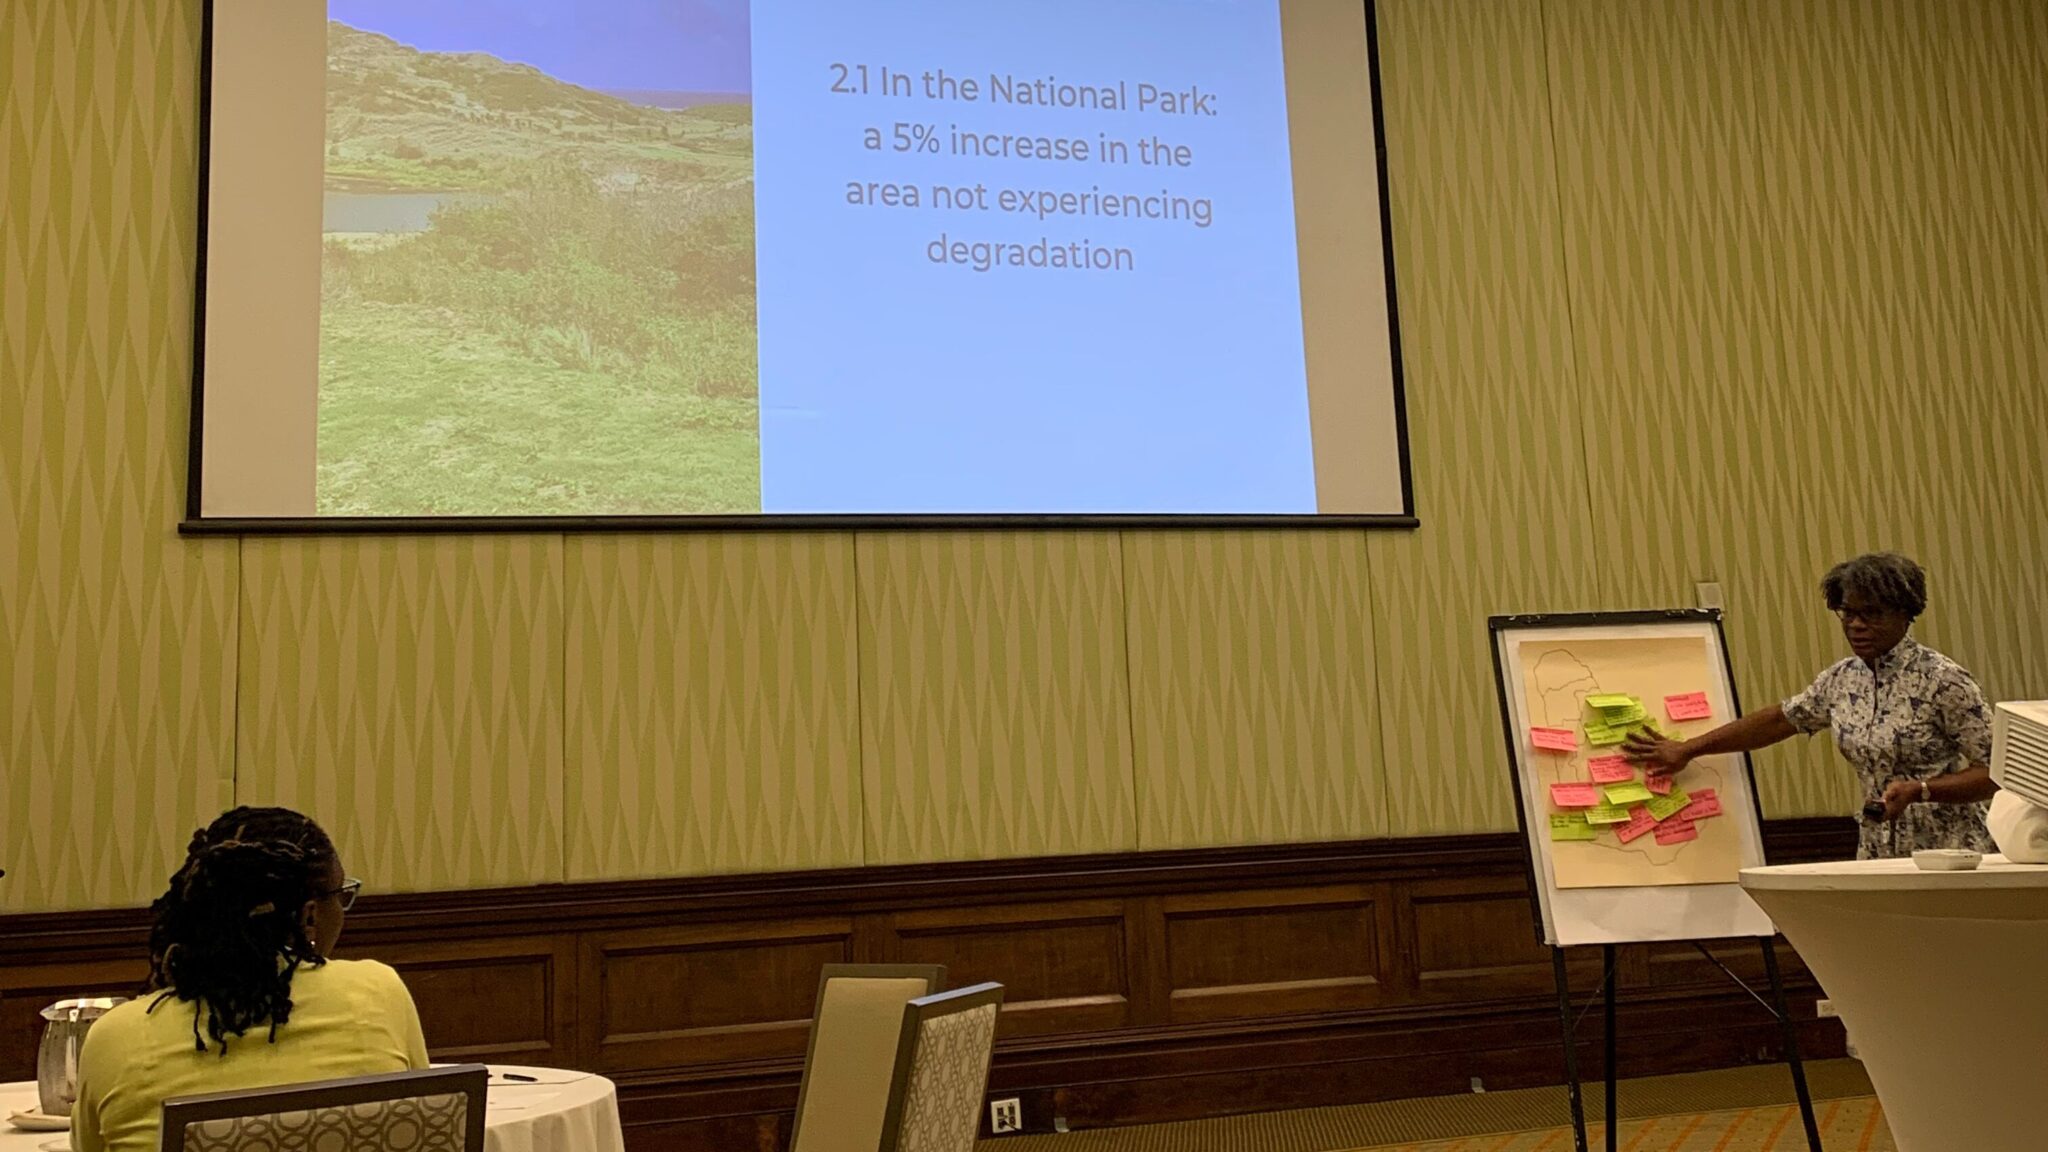 The Biodiversity Conservation and Management Section participated in a national Land Degradation Neutrality (LDN) target-setting workshop on 15 March 2023 facilitated by Dr. Thérèse Yarde.